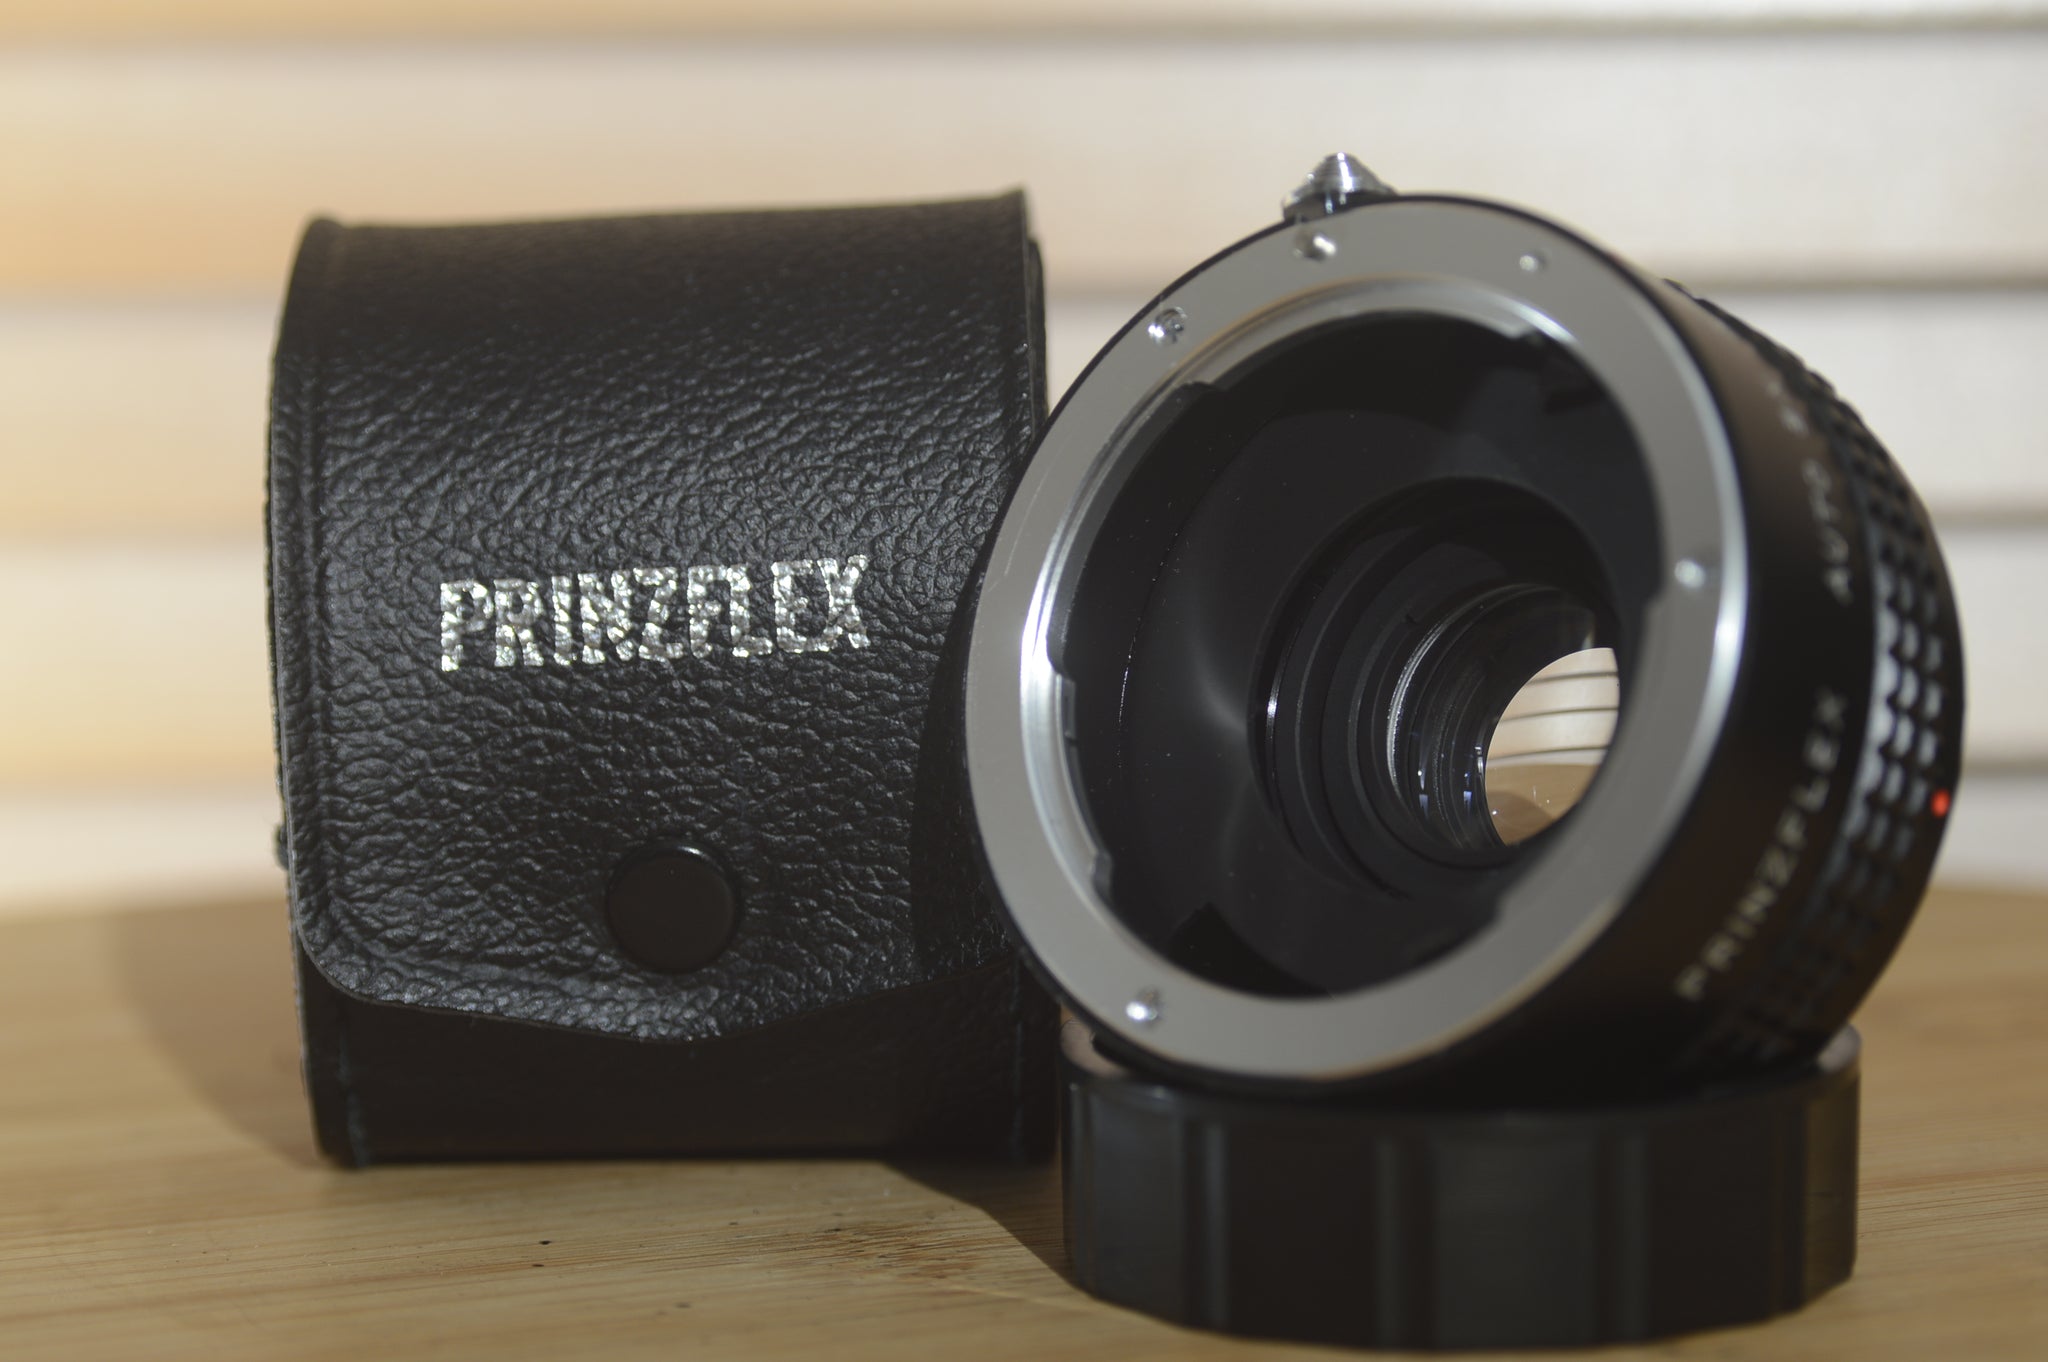 Prinzflex PK Auto 3X Tele converter with case in great condition. Triple your lens' focal length. - RewindCameras quality vintage cameras, fully tested and serviced